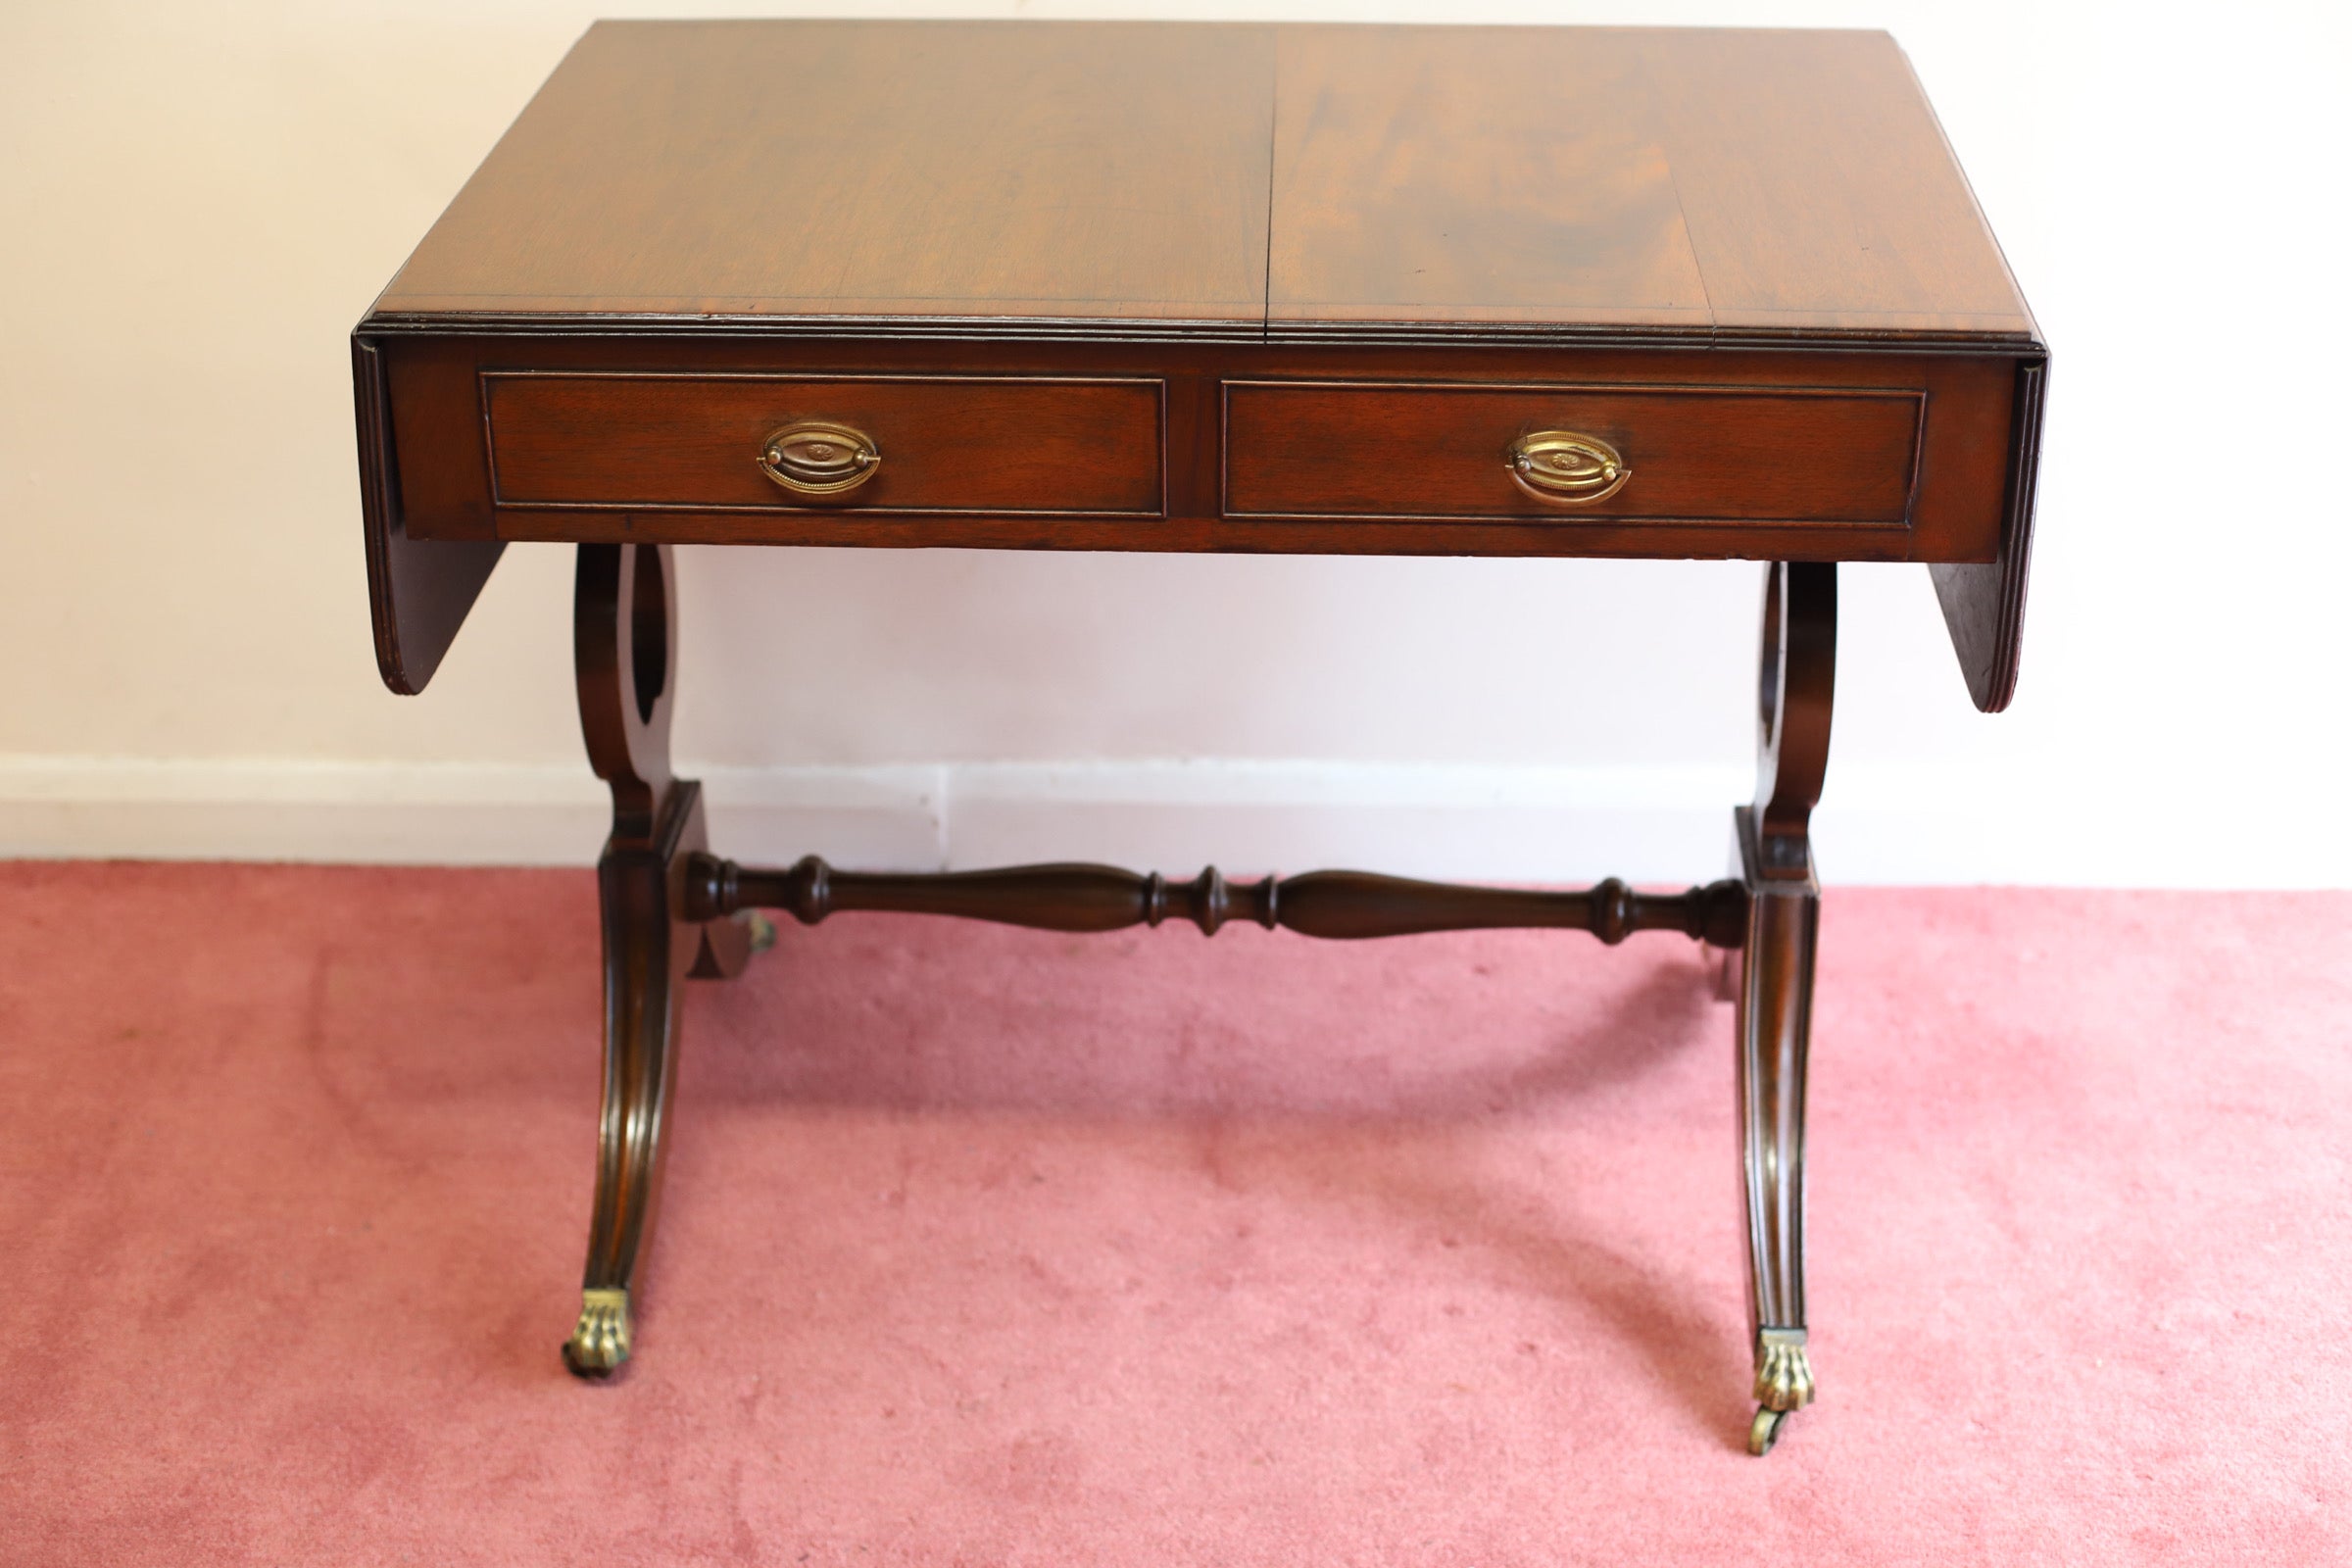 Beautifull Edwardian oak Sofa Table is in Great Condition having a Cross banded Inlay and Readed Edged Top and Two Extending ends supported by Two Solid Swing Out Stays Underneath. Below the Top the Table has two Drawers to one Side and Two dummy